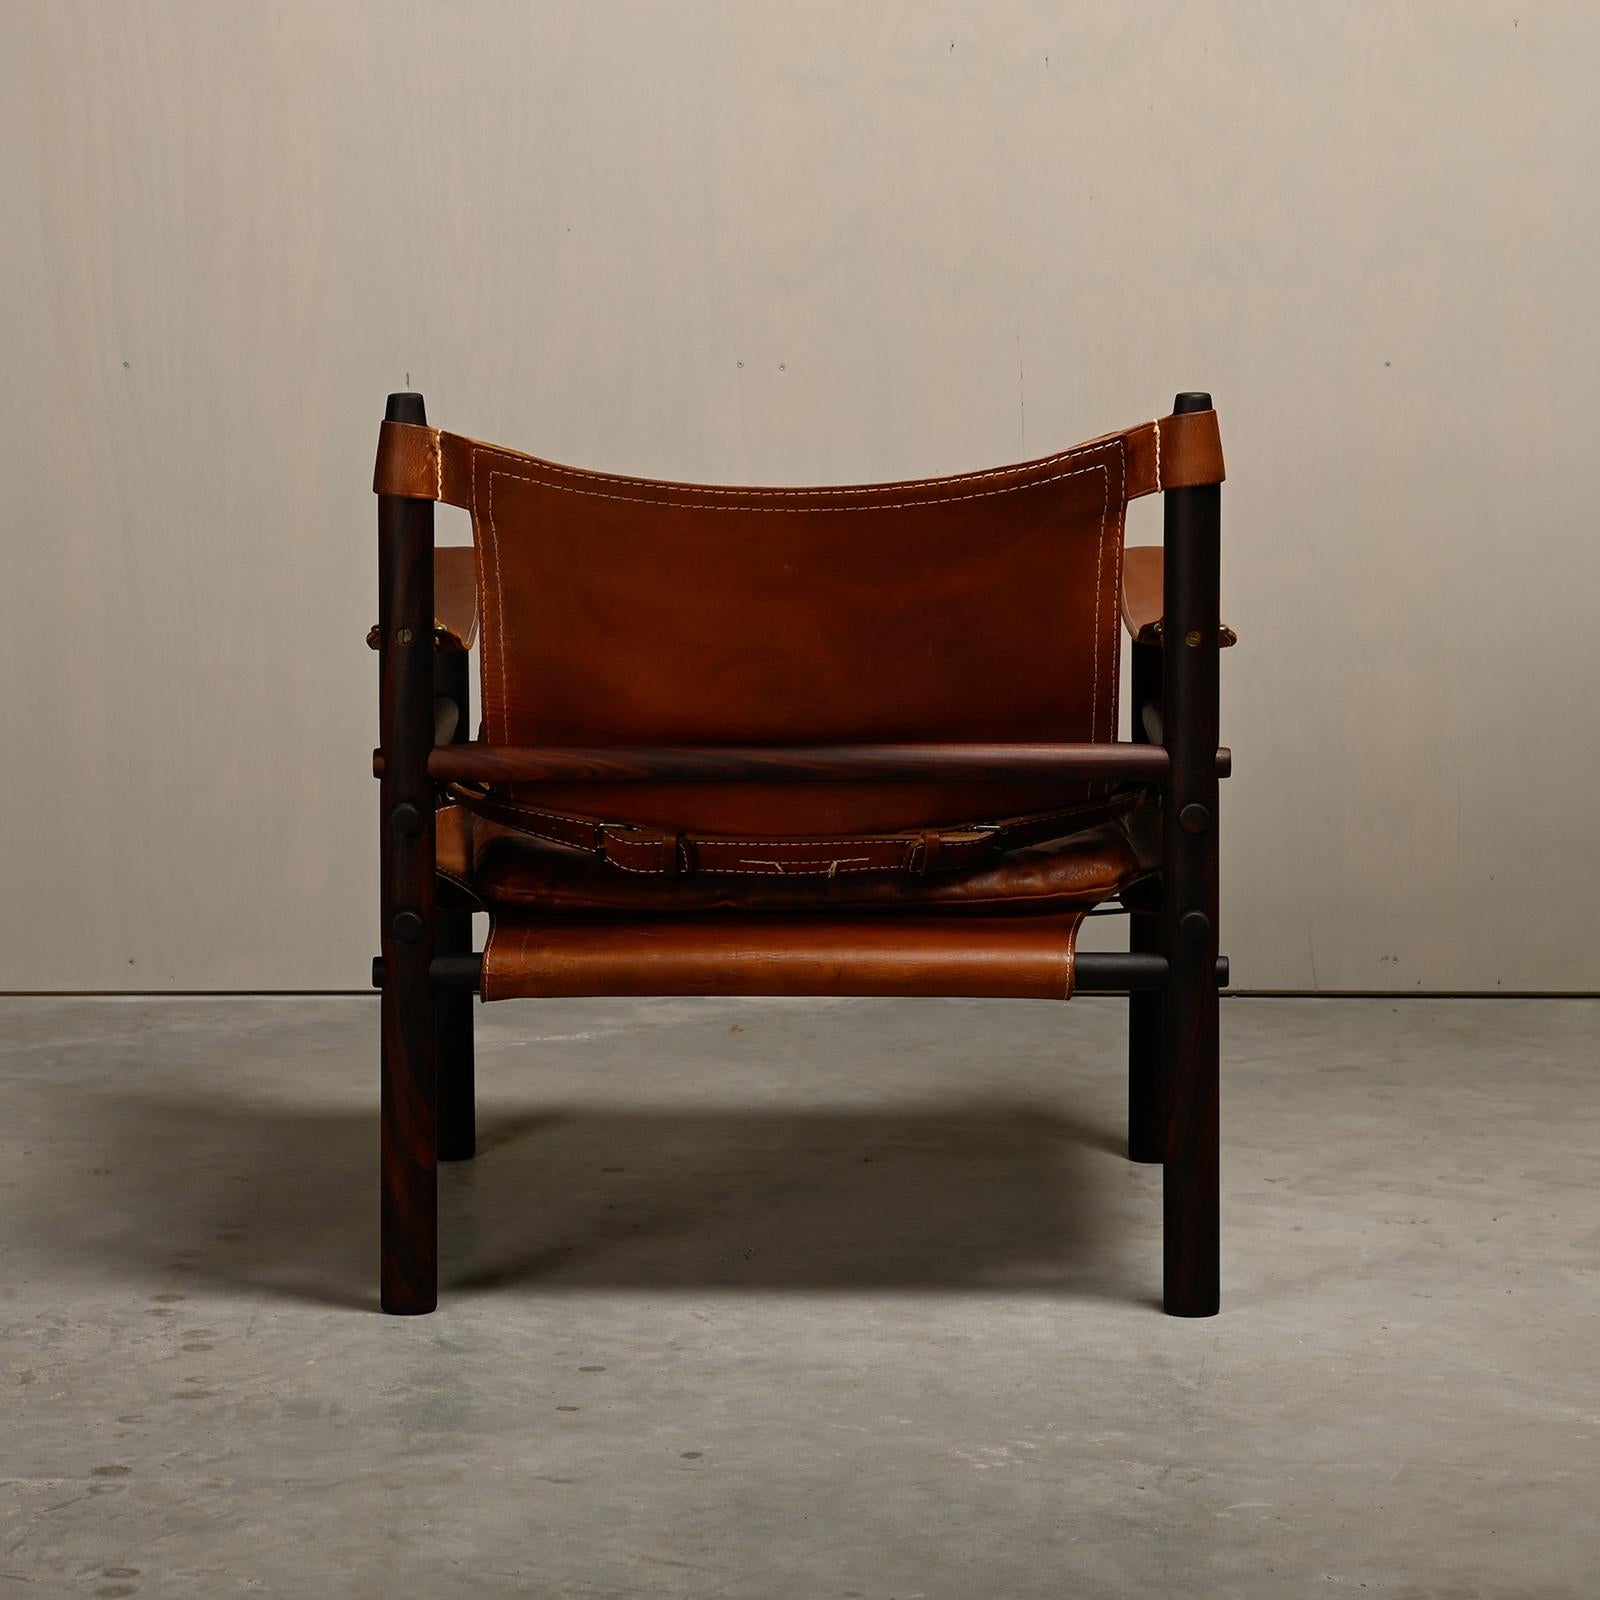 Leather Arne Norell Sirocco Safari Lounge Chair in dark brown wood and leather, Sweden